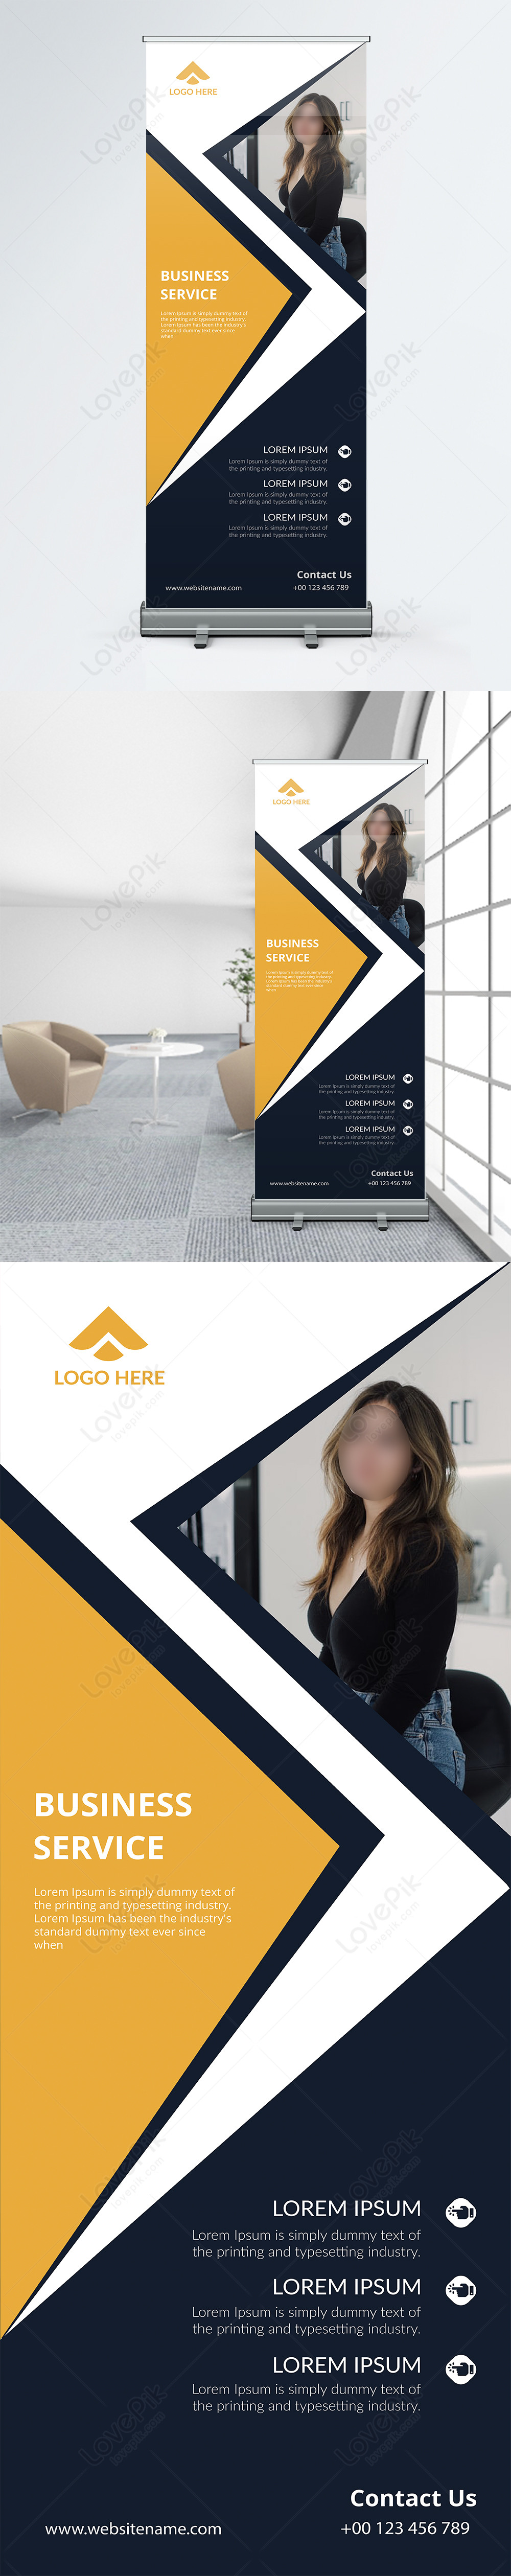 Business roll up banner template image_picture free download 450093186